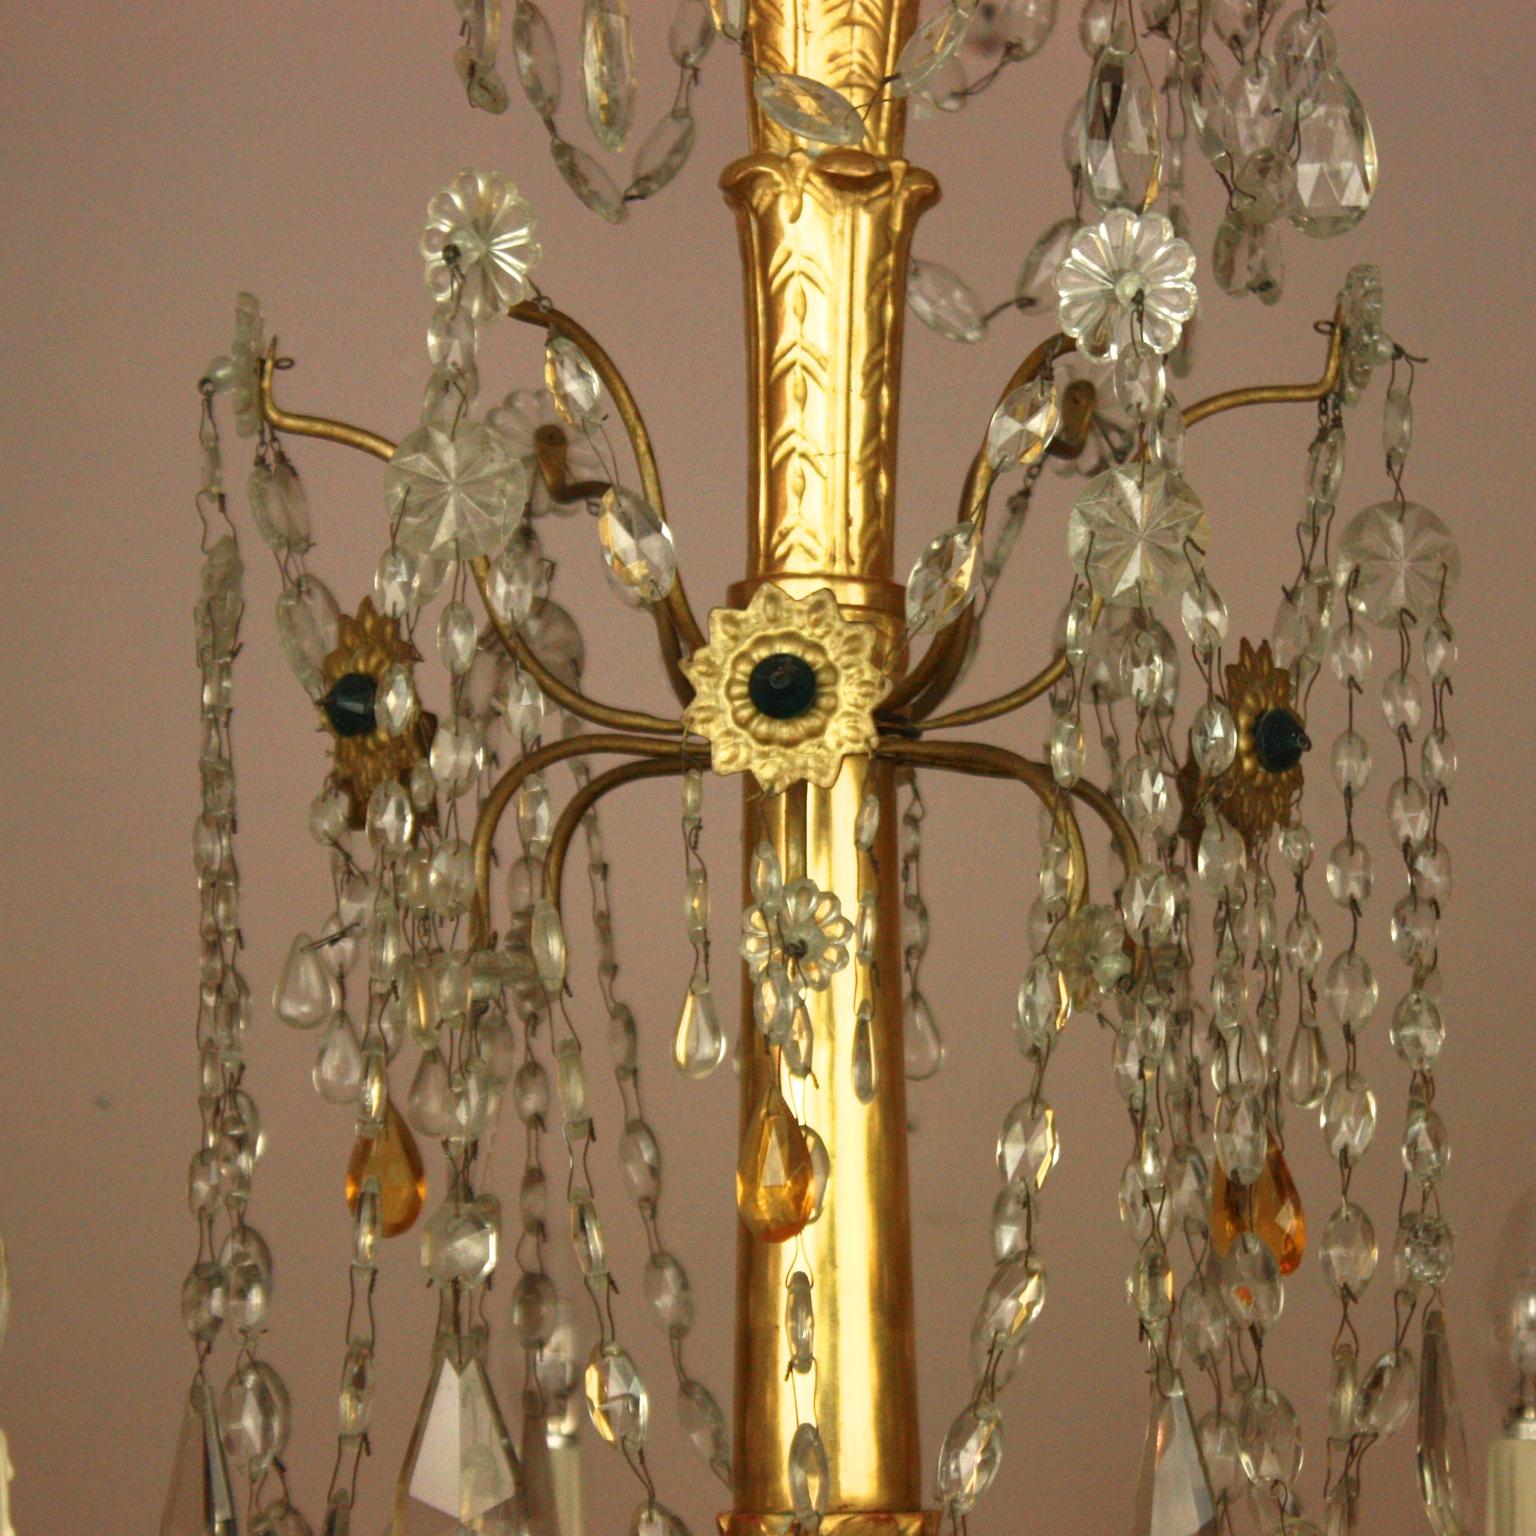 Pair of Late 18th Century Neoclassical Genoa/Italy Giltwood Crystal Chandeliers 1